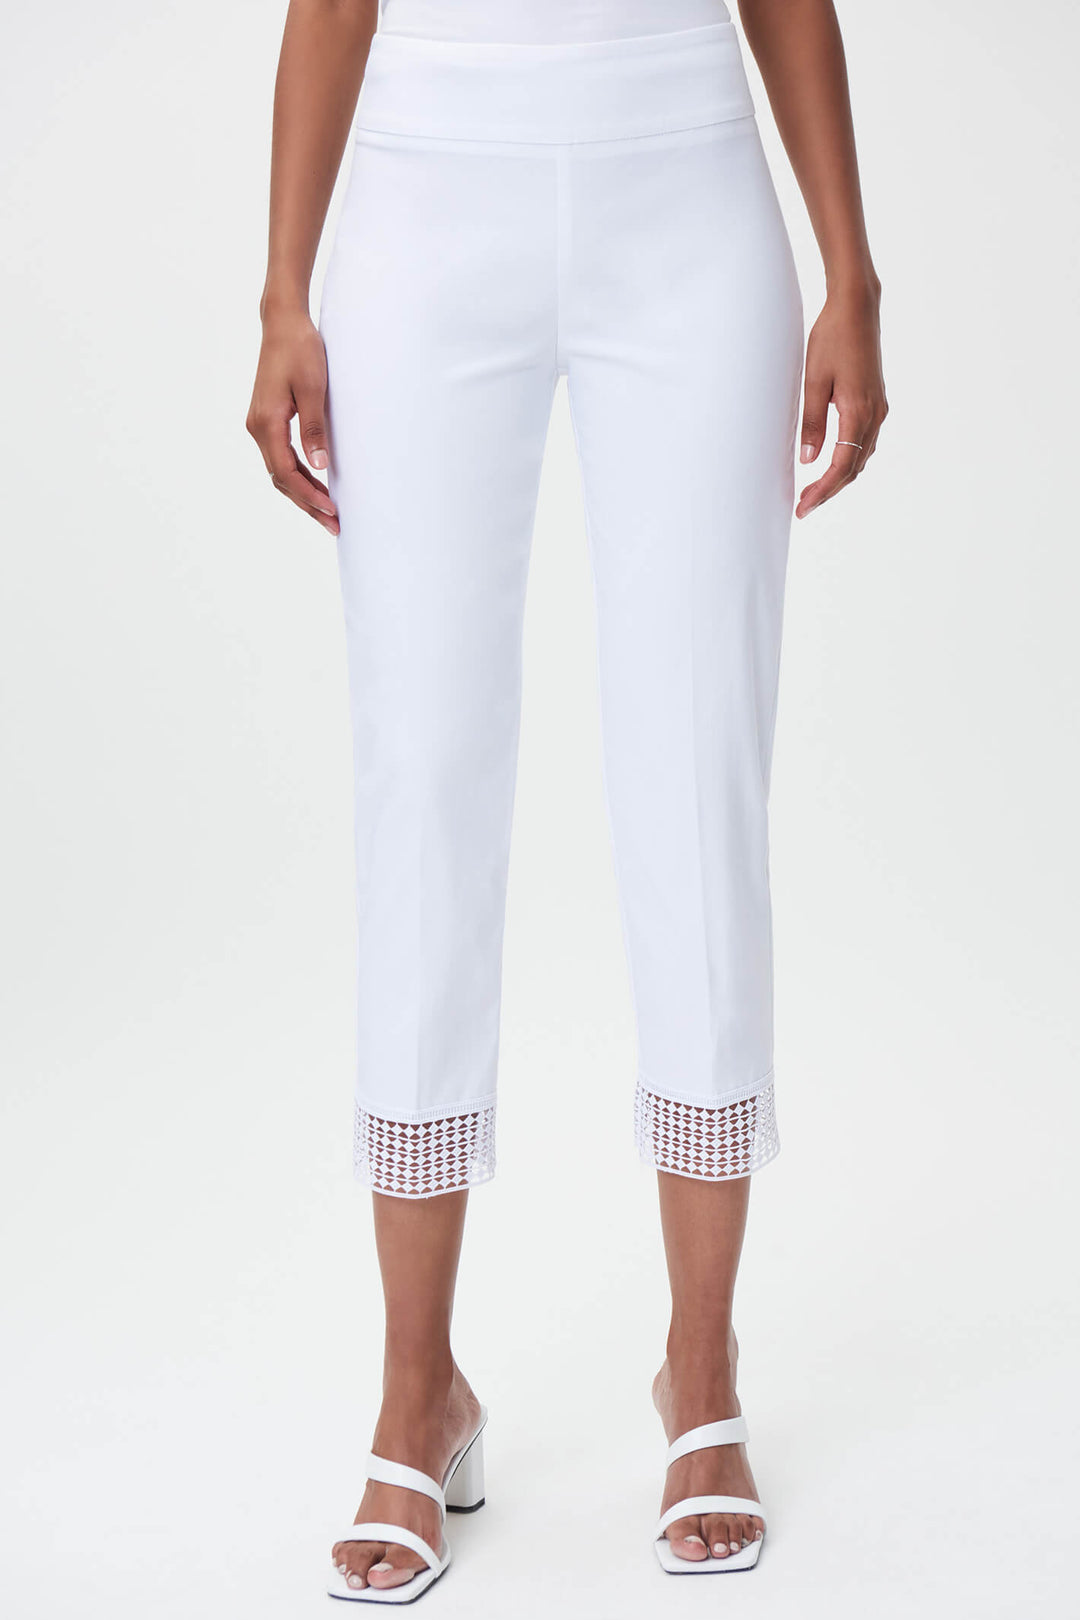 Joseph Ribkoff 232249 White Lace Hem Cropped Trousers - Experience Boutique